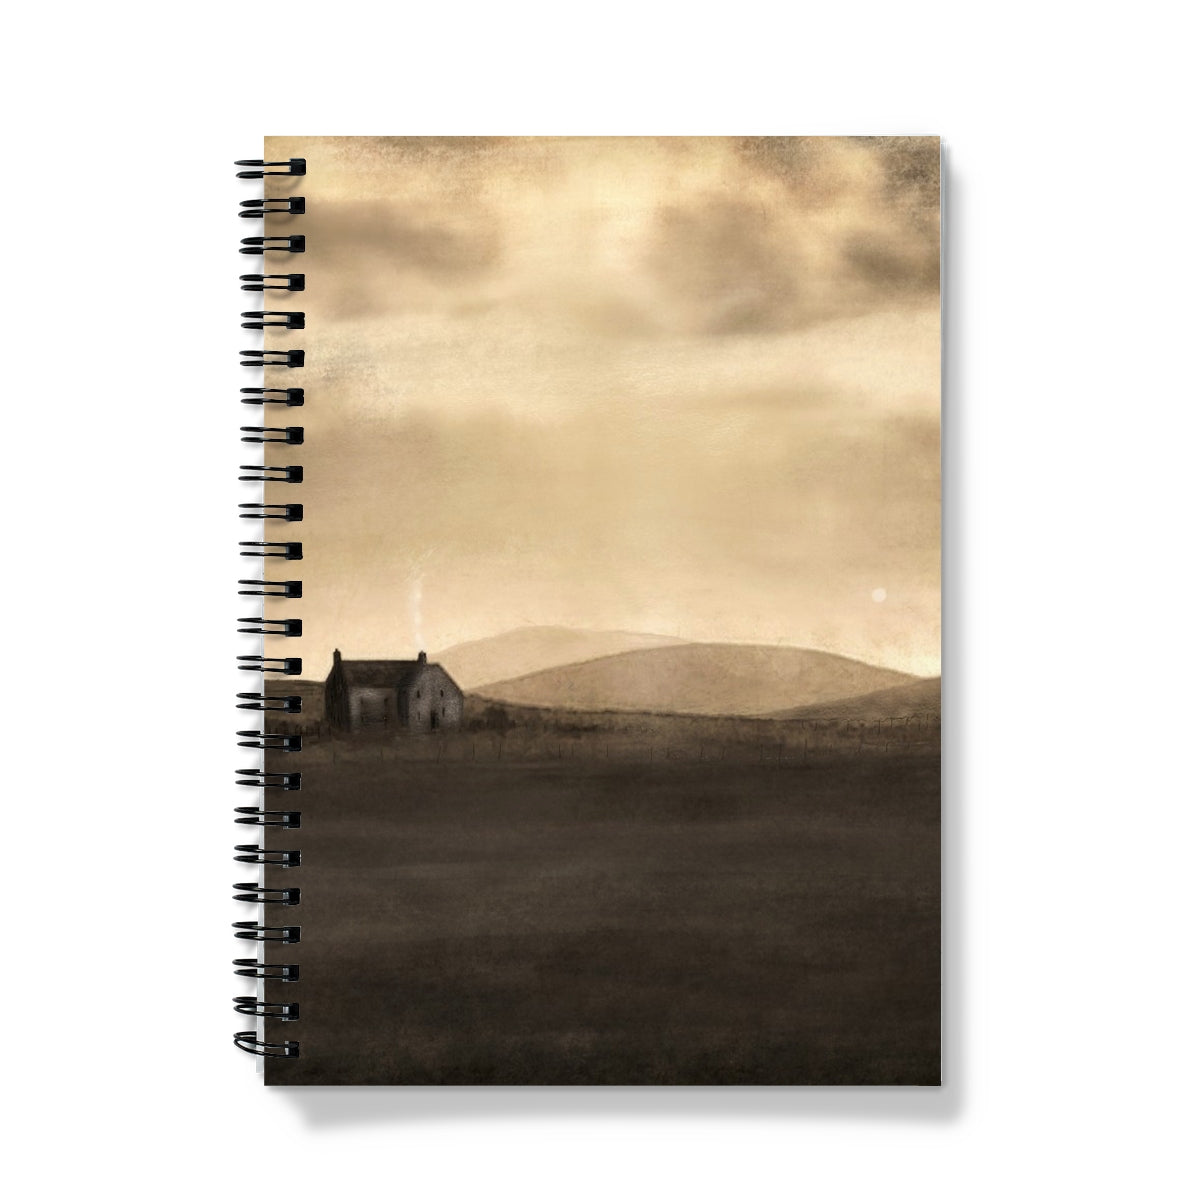 A Moonlit Croft Art Gifts Notebook-Journals & Notebooks-Hebridean Islands Art Gallery-A4-Lined-Paintings, Prints, Homeware, Art Gifts From Scotland By Scottish Artist Kevin Hunter